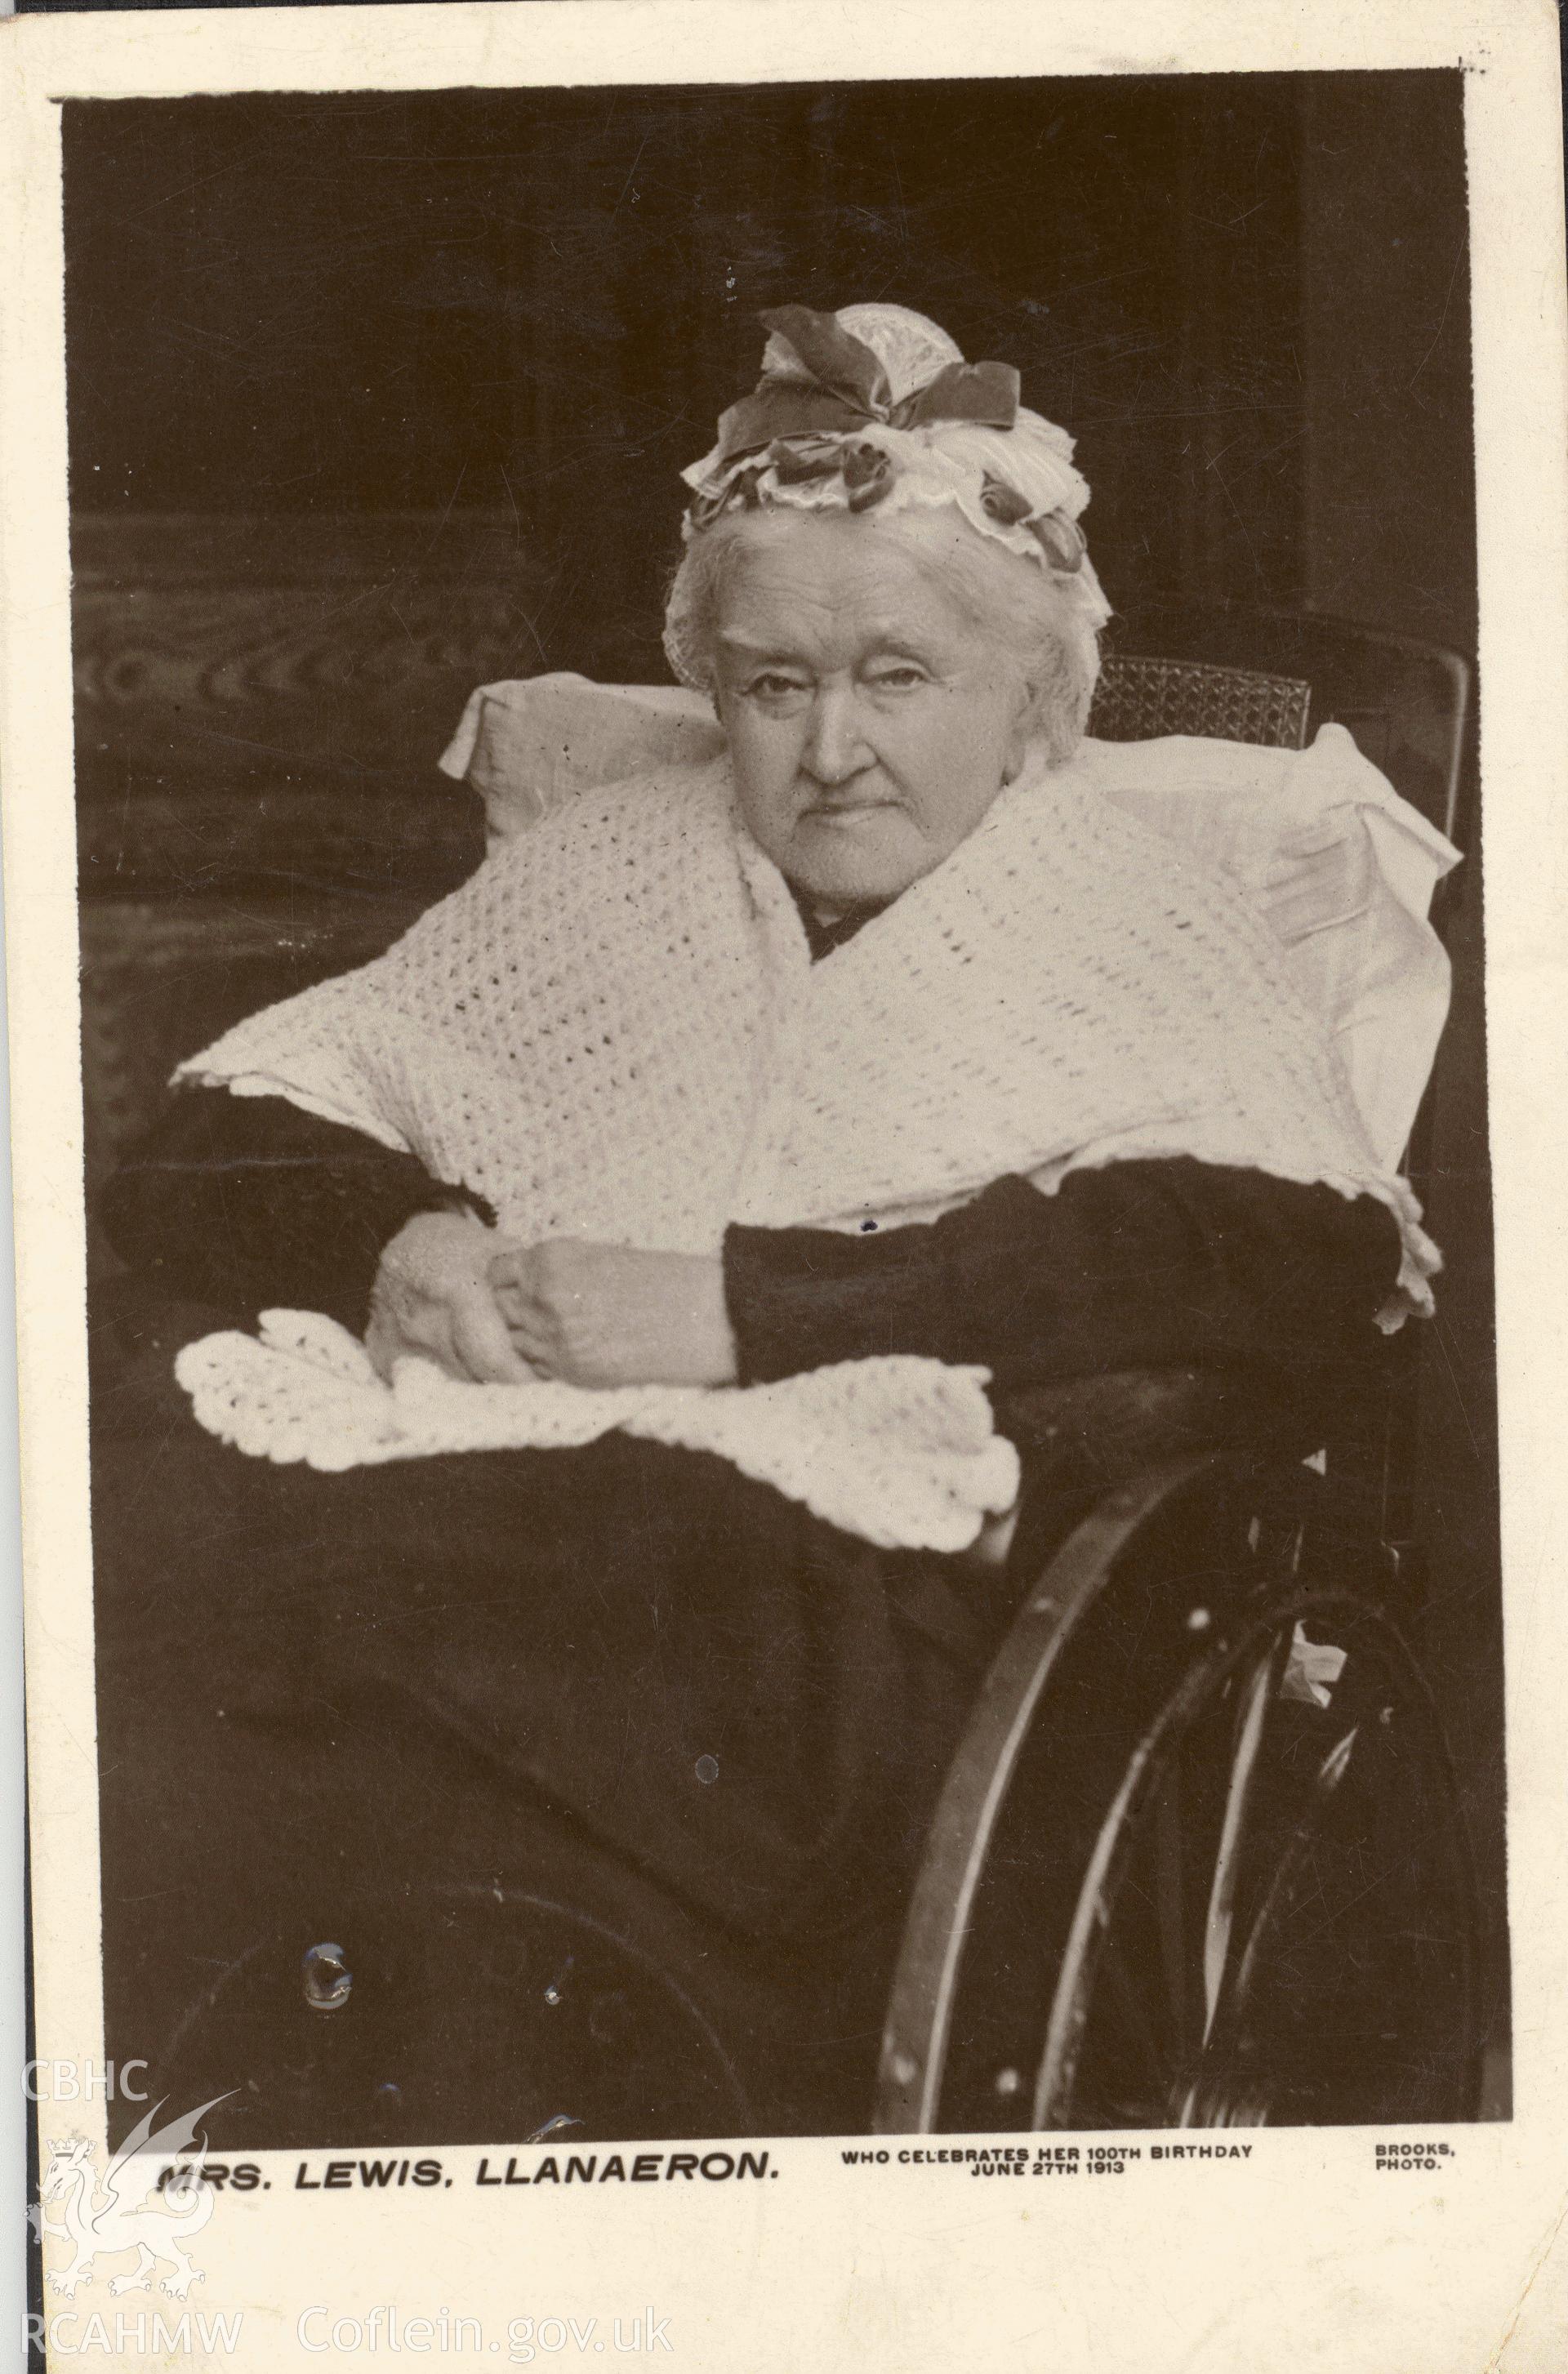 Digitised postcard image of photograph of Mrs Lewis, Llanerchaeron House, on her 100th birthday, Brooks Photo. Produced by Parks and Gardens Data Services, from an original item in the Peter Davis Collection at Parks and Gardens UK. We hold only web-resolution images of this collection, suitable for viewing on screen and for research purposes only. We do not hold the original images, or publication quality scans.